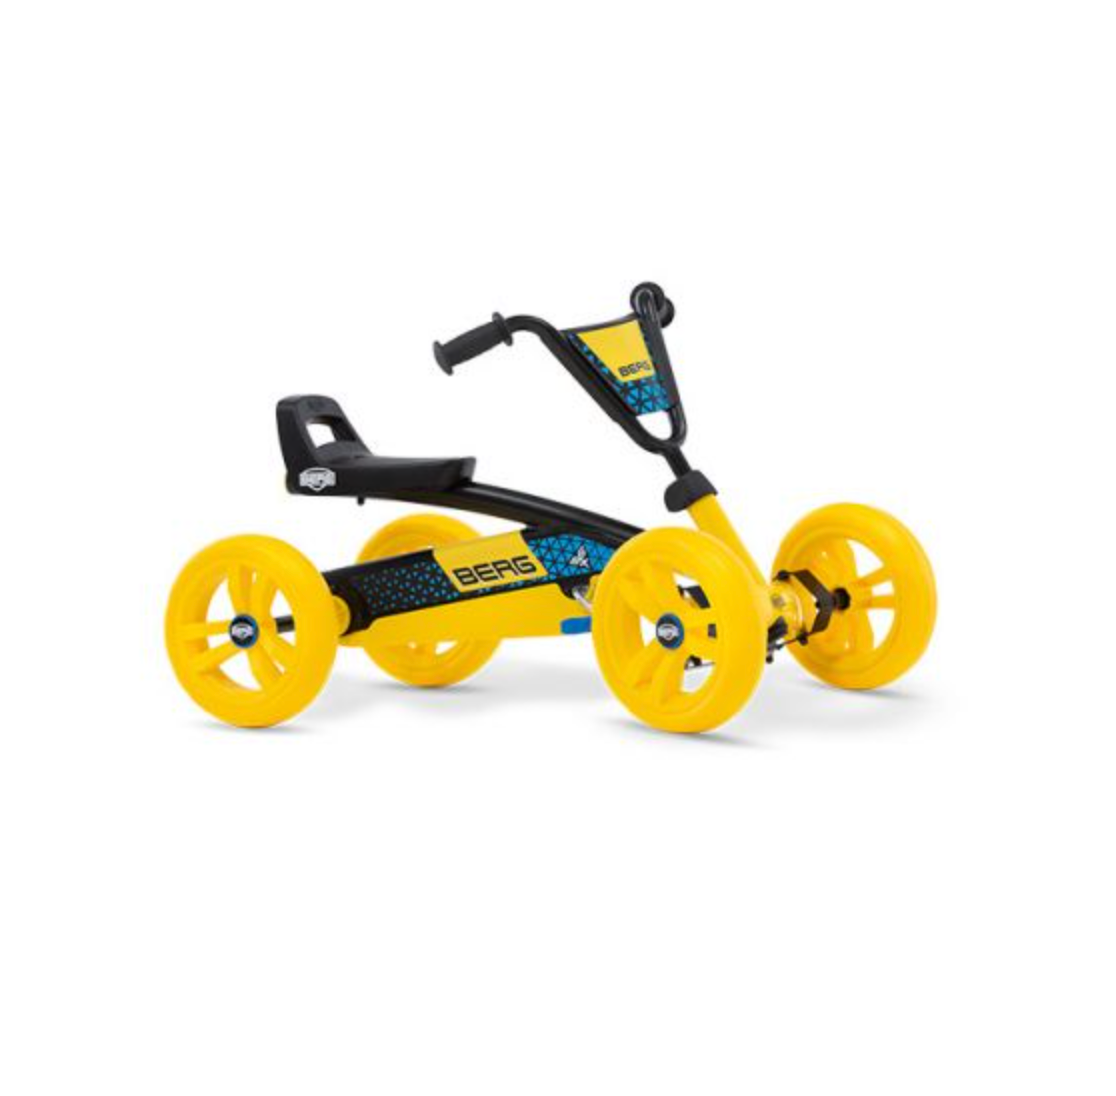 BERG Buzzy BSX Pedal Kart - WePlayAlot